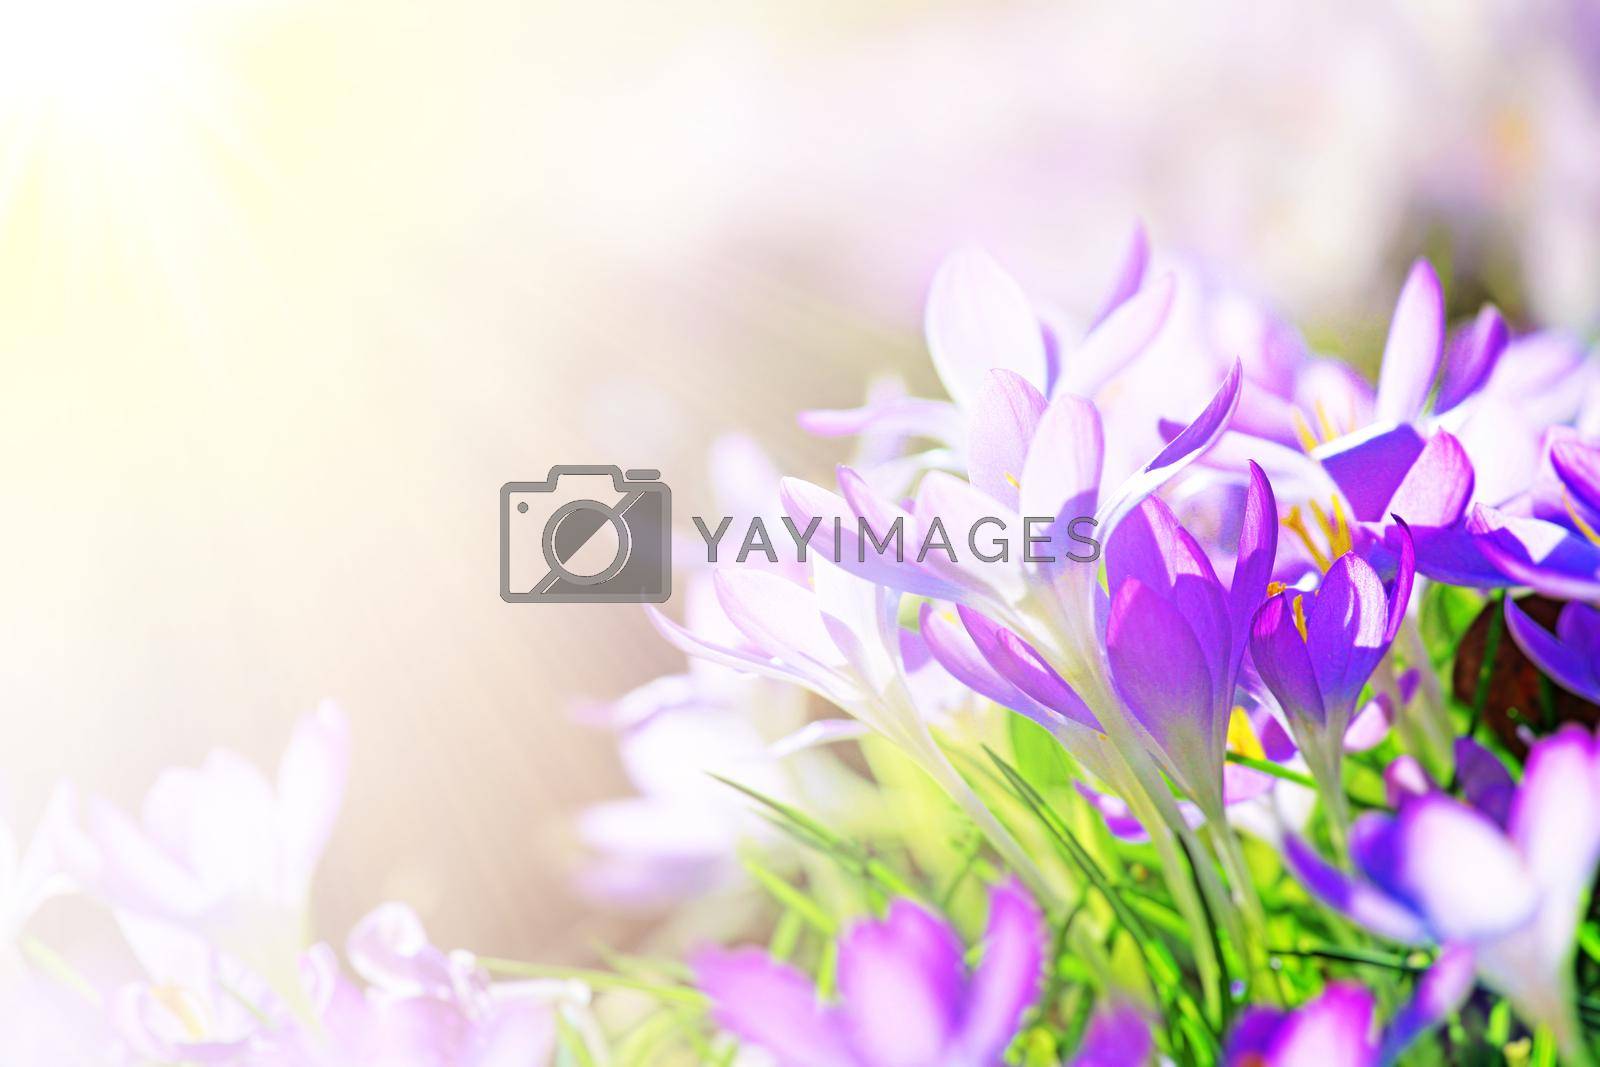 Royalty free image of Blooming purple crocus flowers in a soft focus on a sunny spring day by Taut